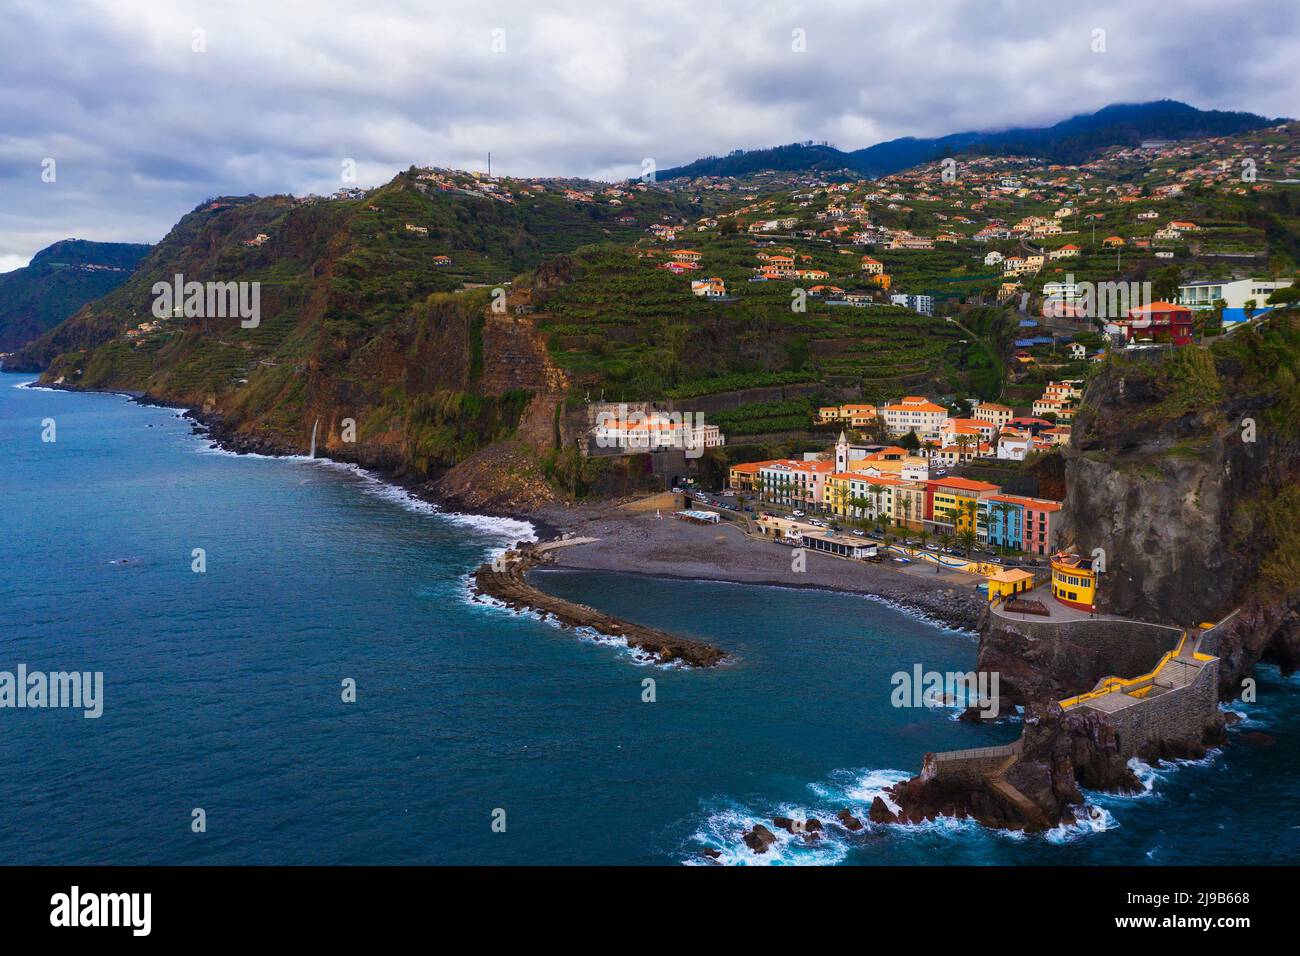 Aerial view of Ponta do Sol in Madeira island, Portugal Stock Photo